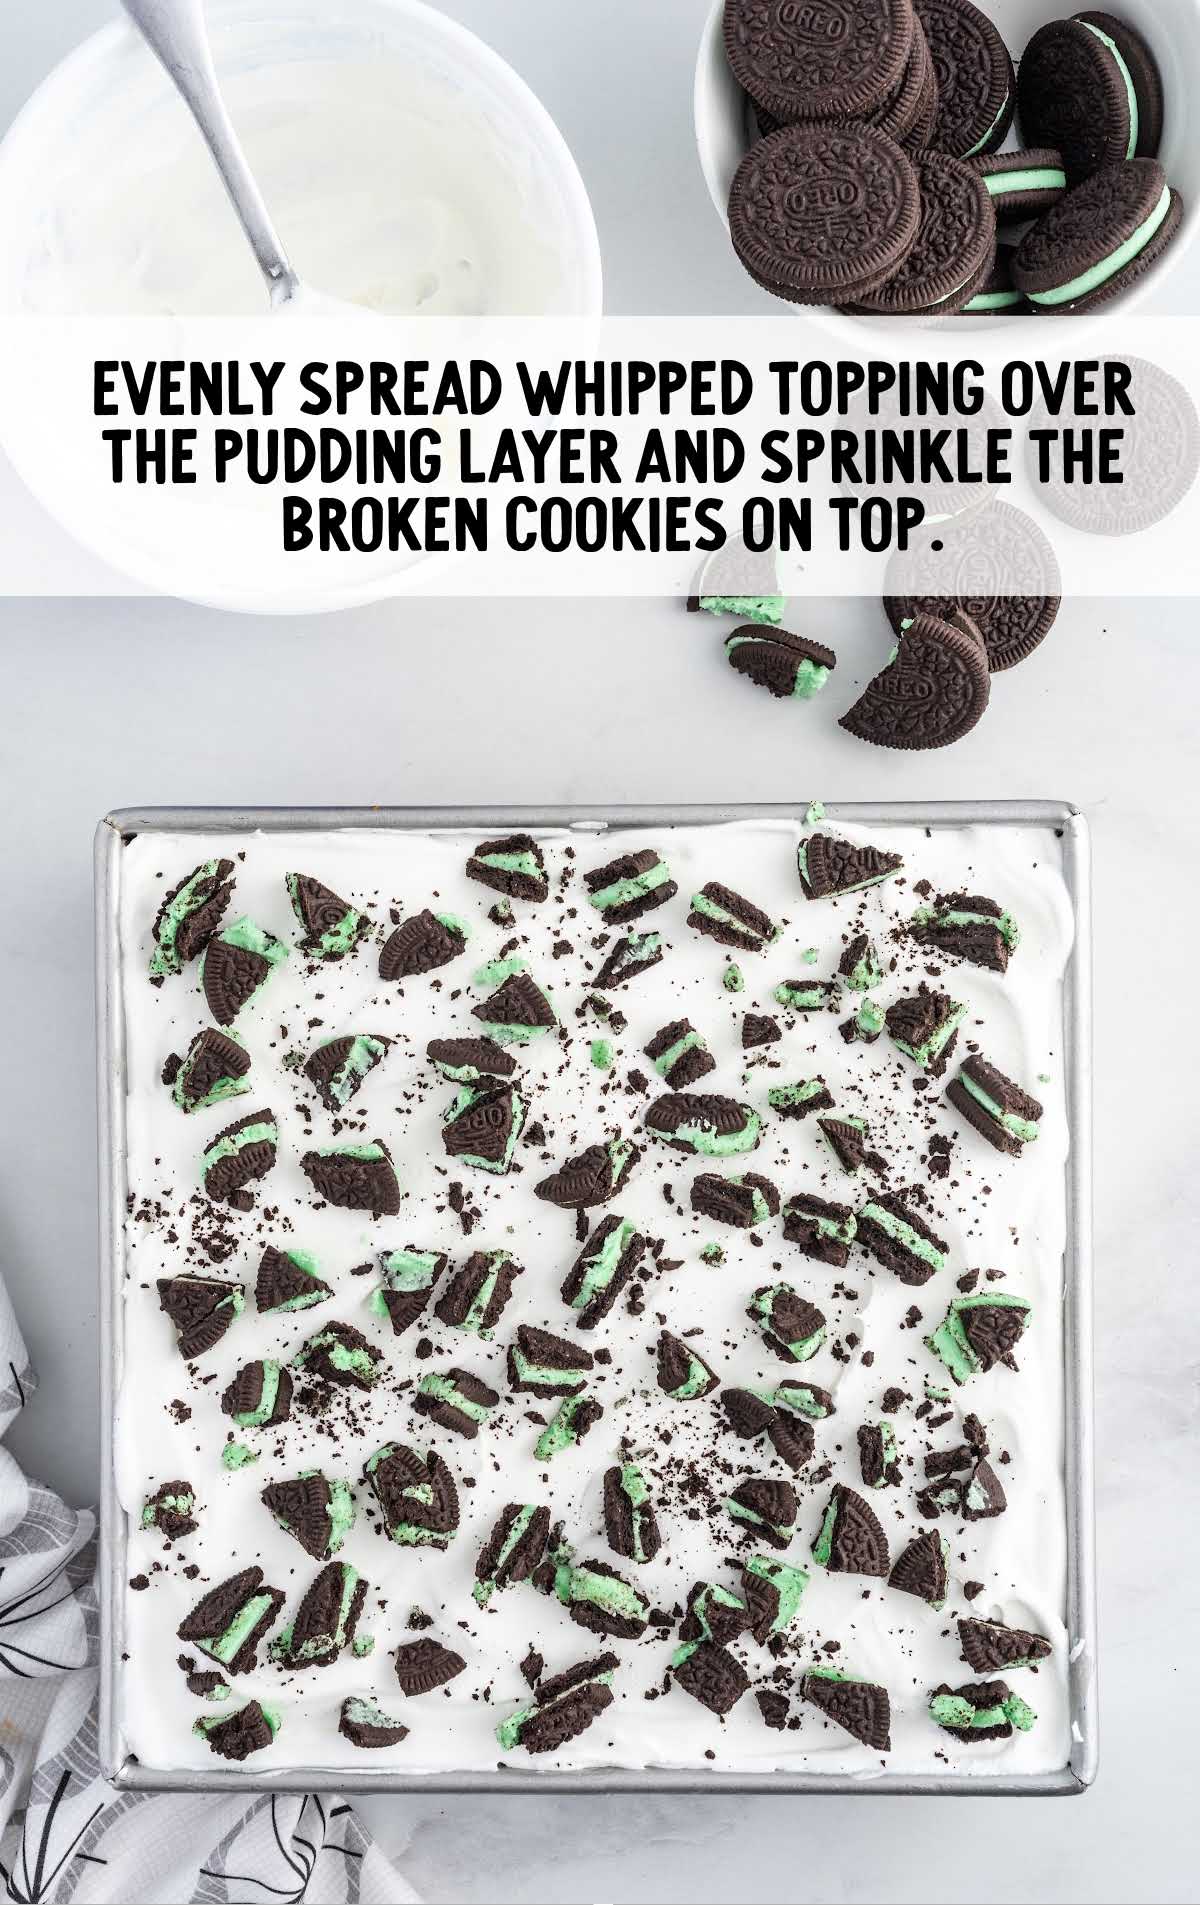 whipped topping spread over the puding layer and sprinkle broken cookies on top